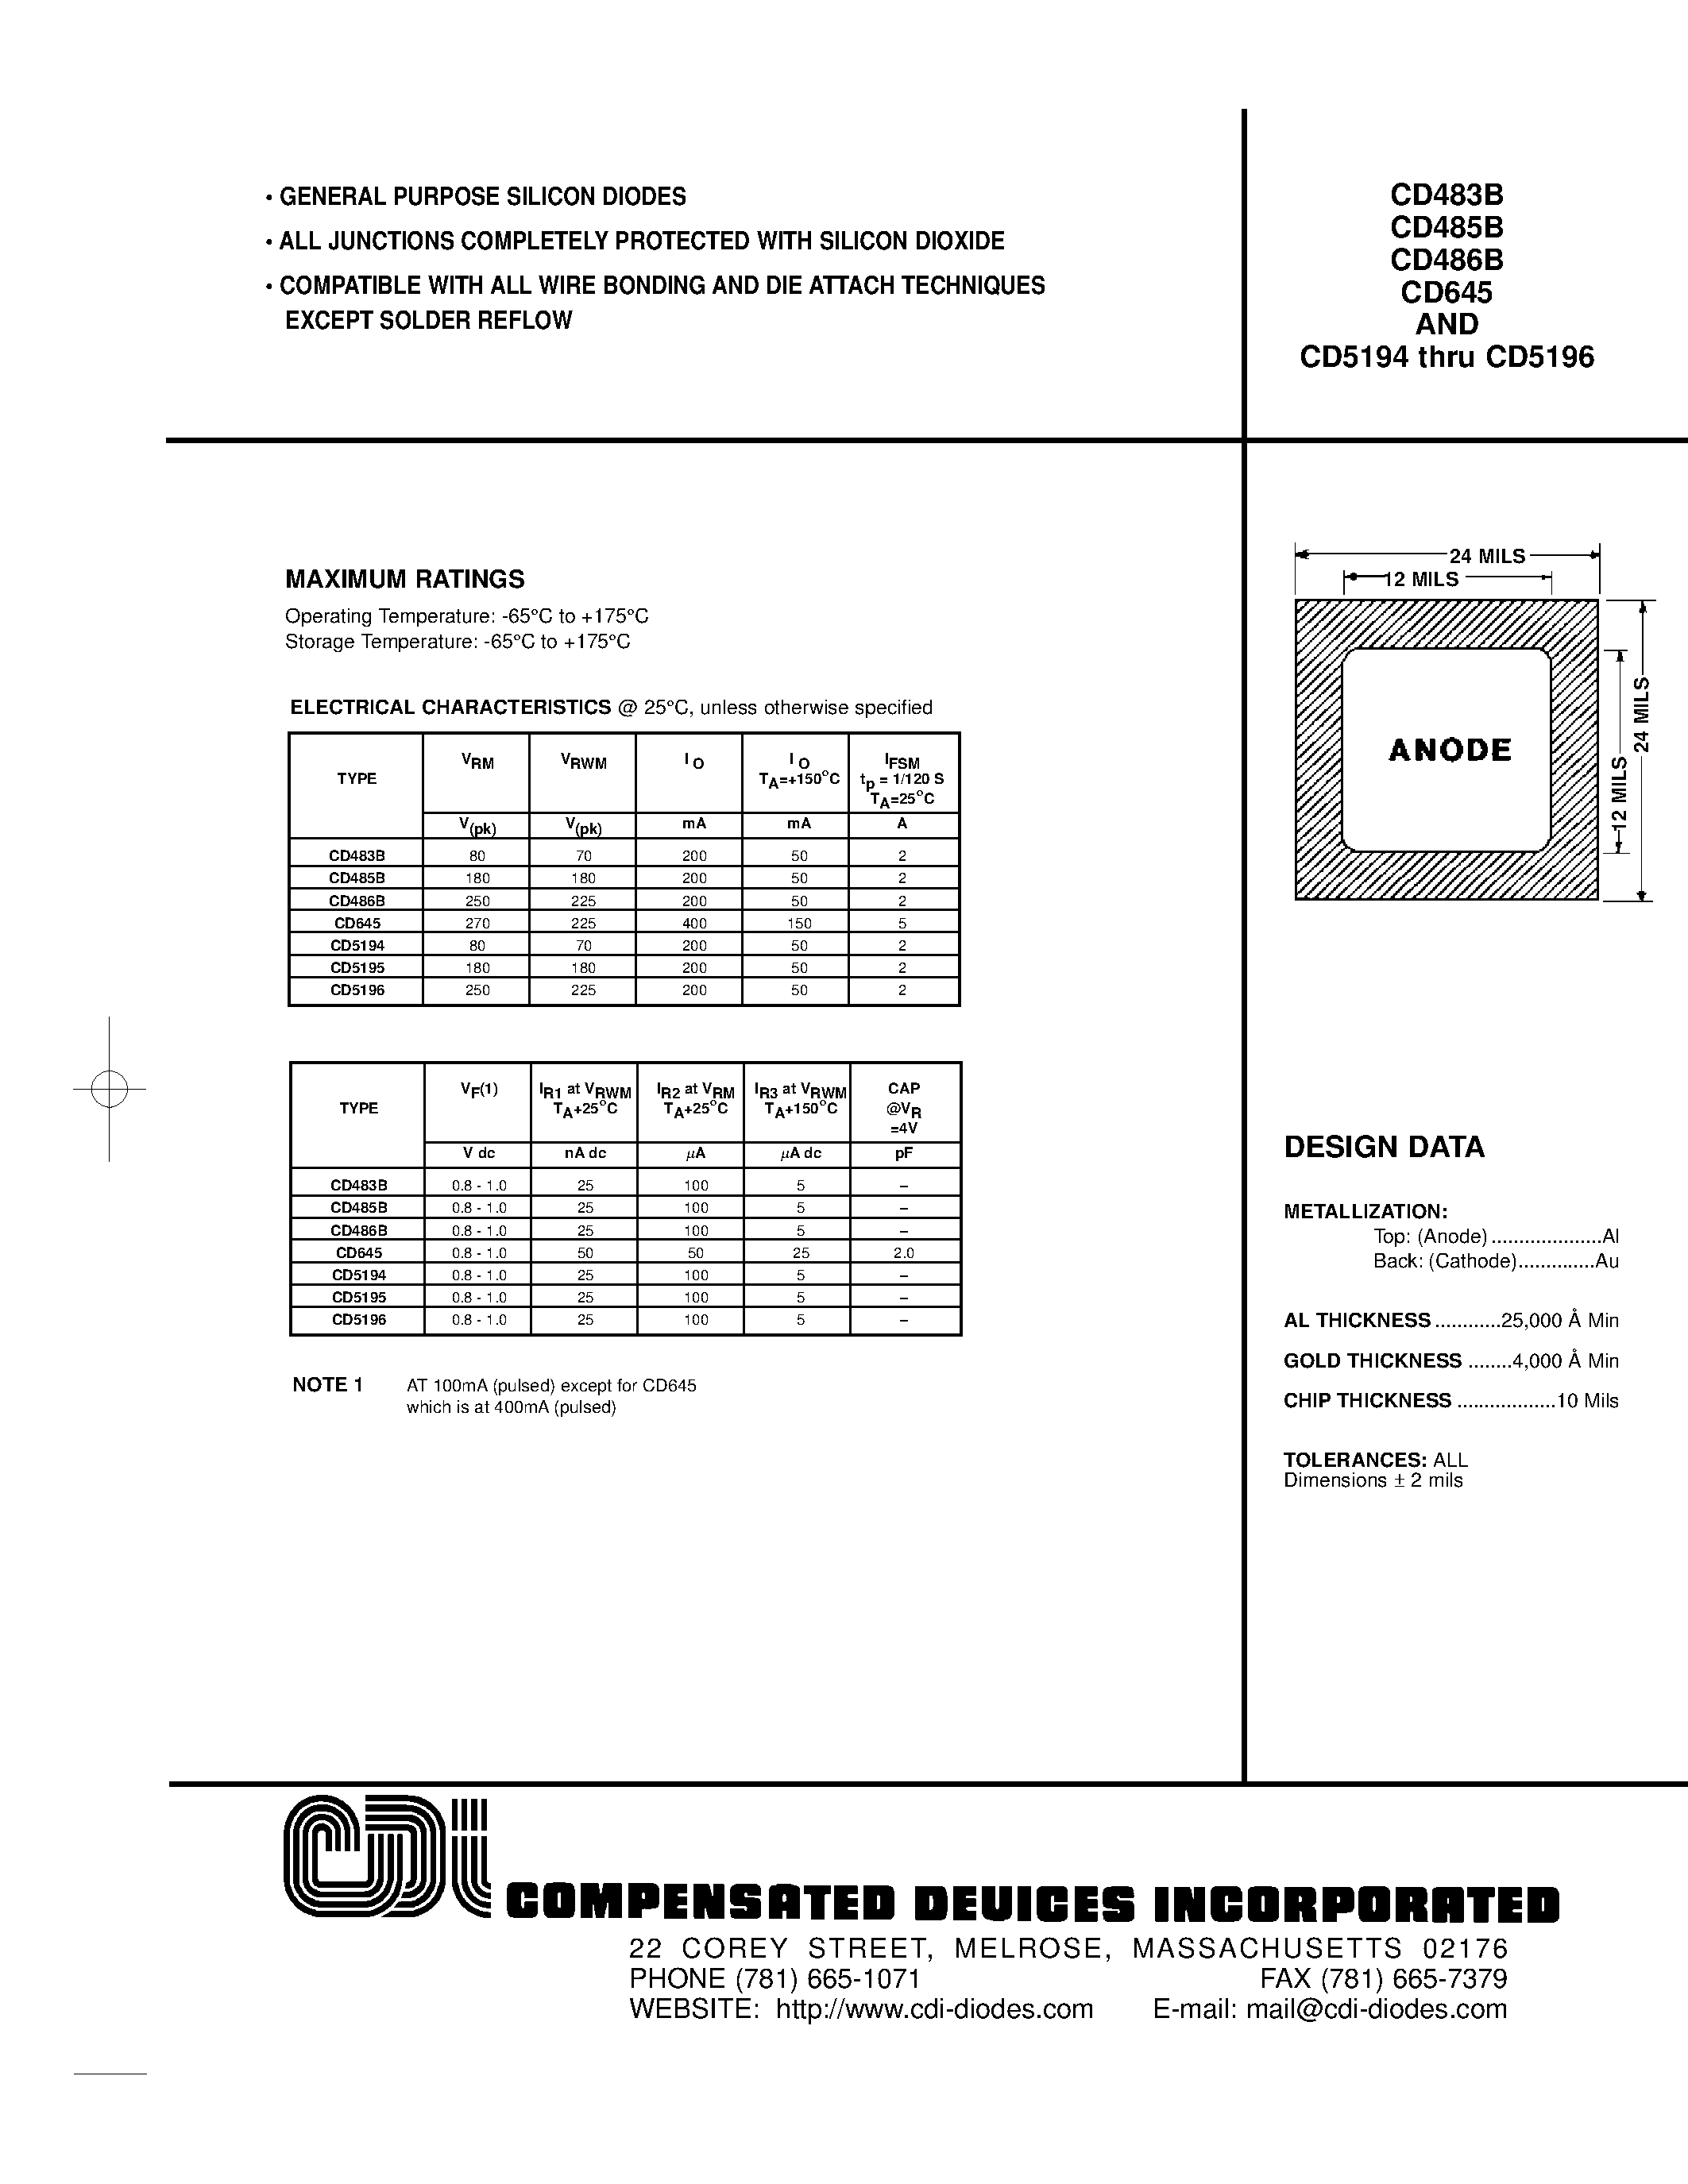 Datasheet CD483B - GENERAL PURPOSE SILICON DIODES page 1